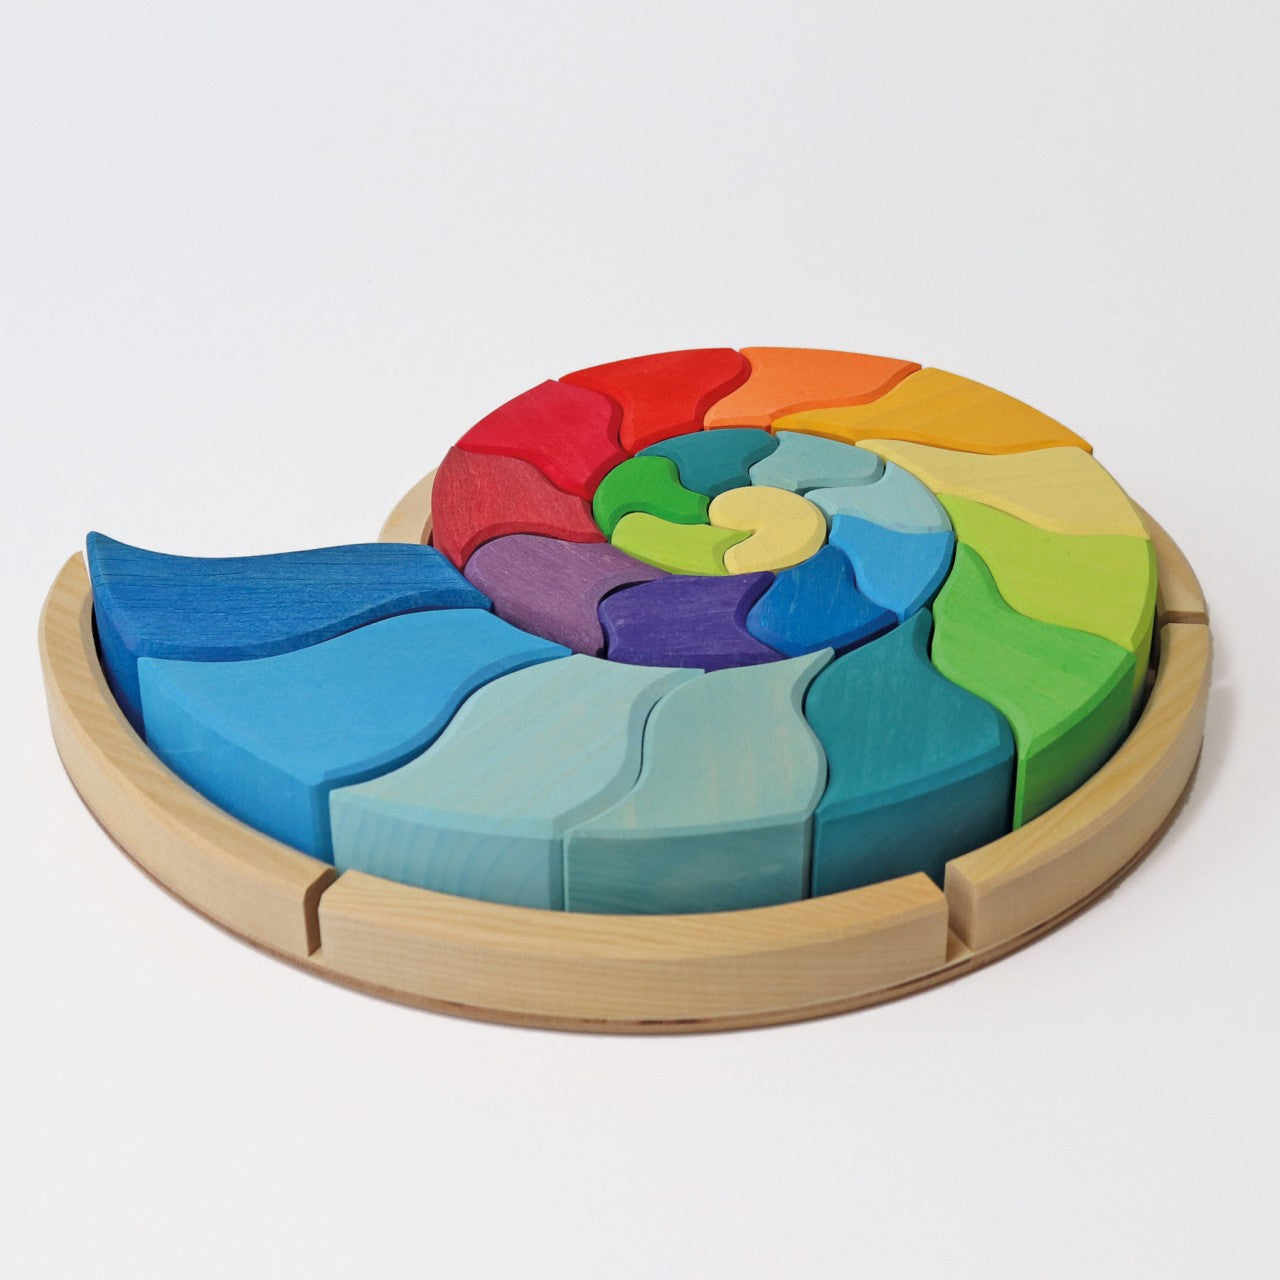 Ammonite | Wooden Puzzle & Building Set | Wooden Toys for Kids | Open-Ended Play